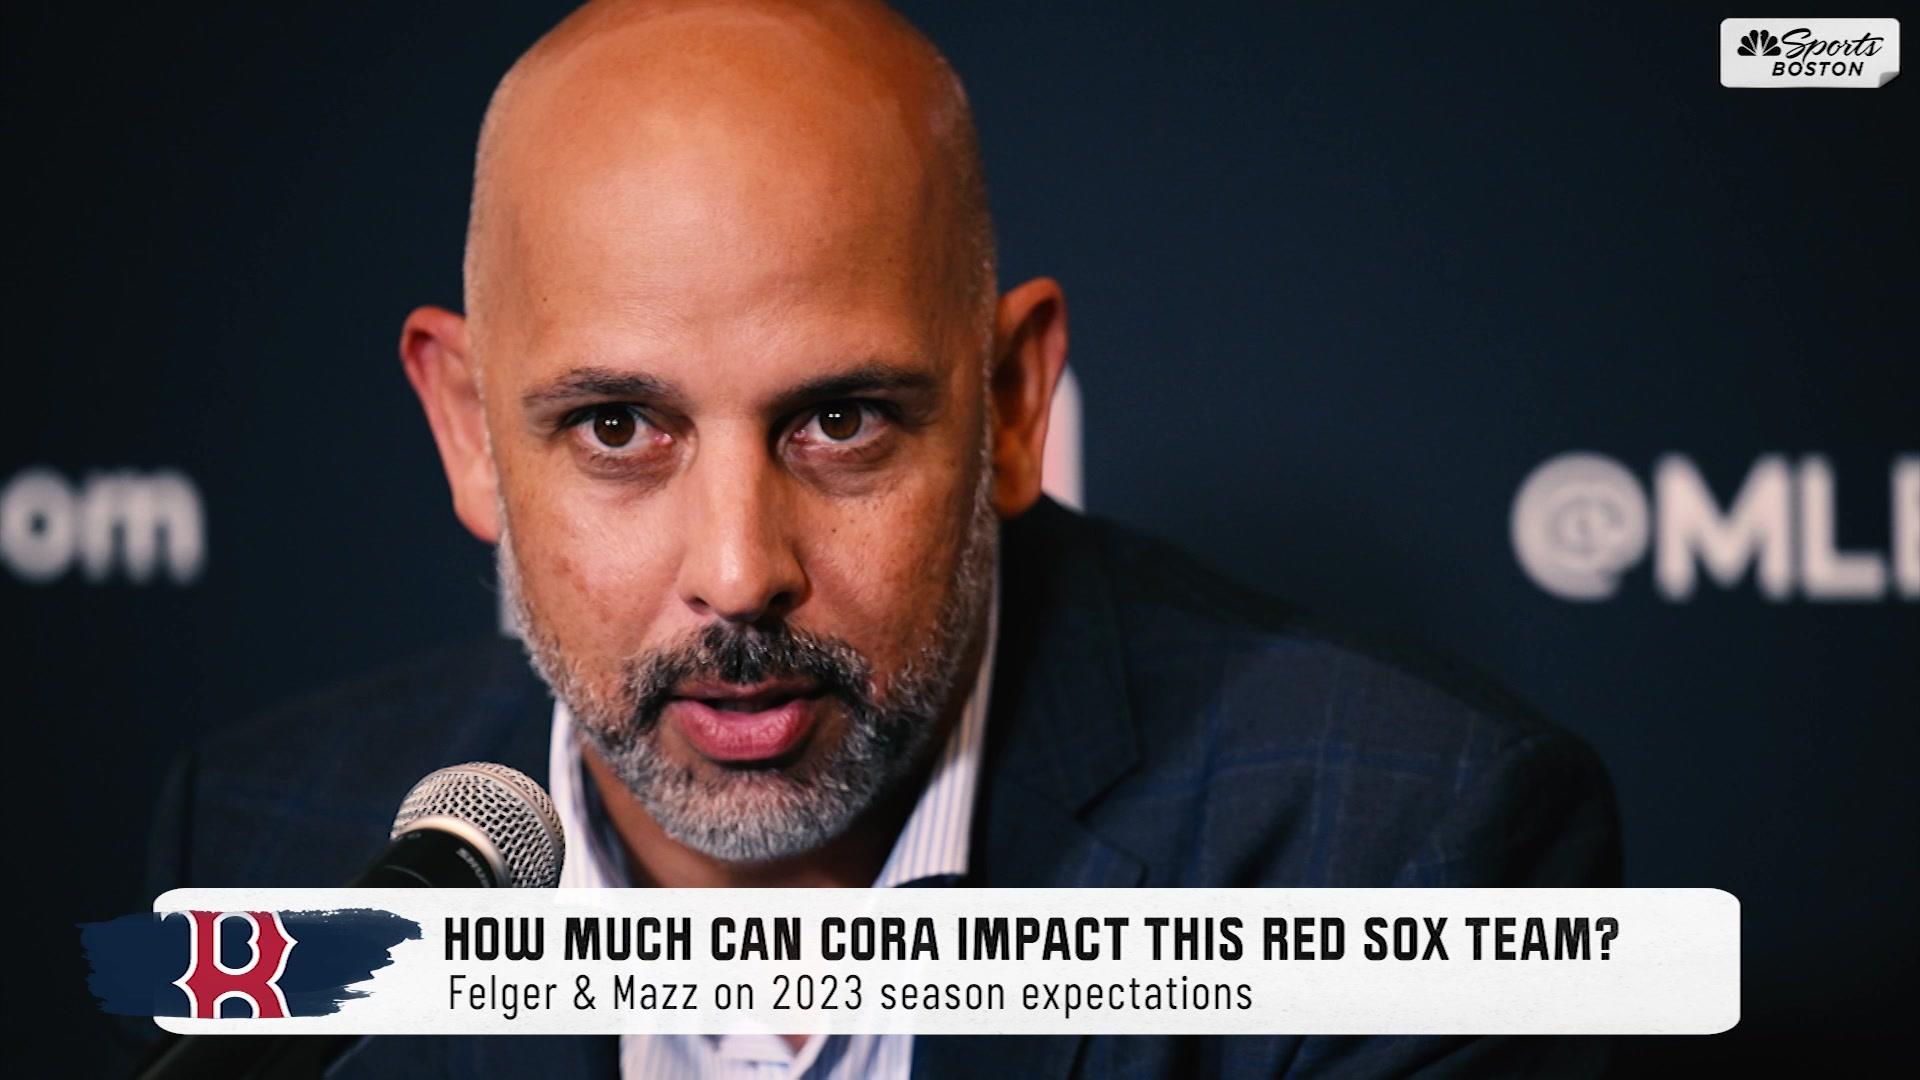 How much impact can Alex Cora have on this Red Sox team? – NBC Sports Boston